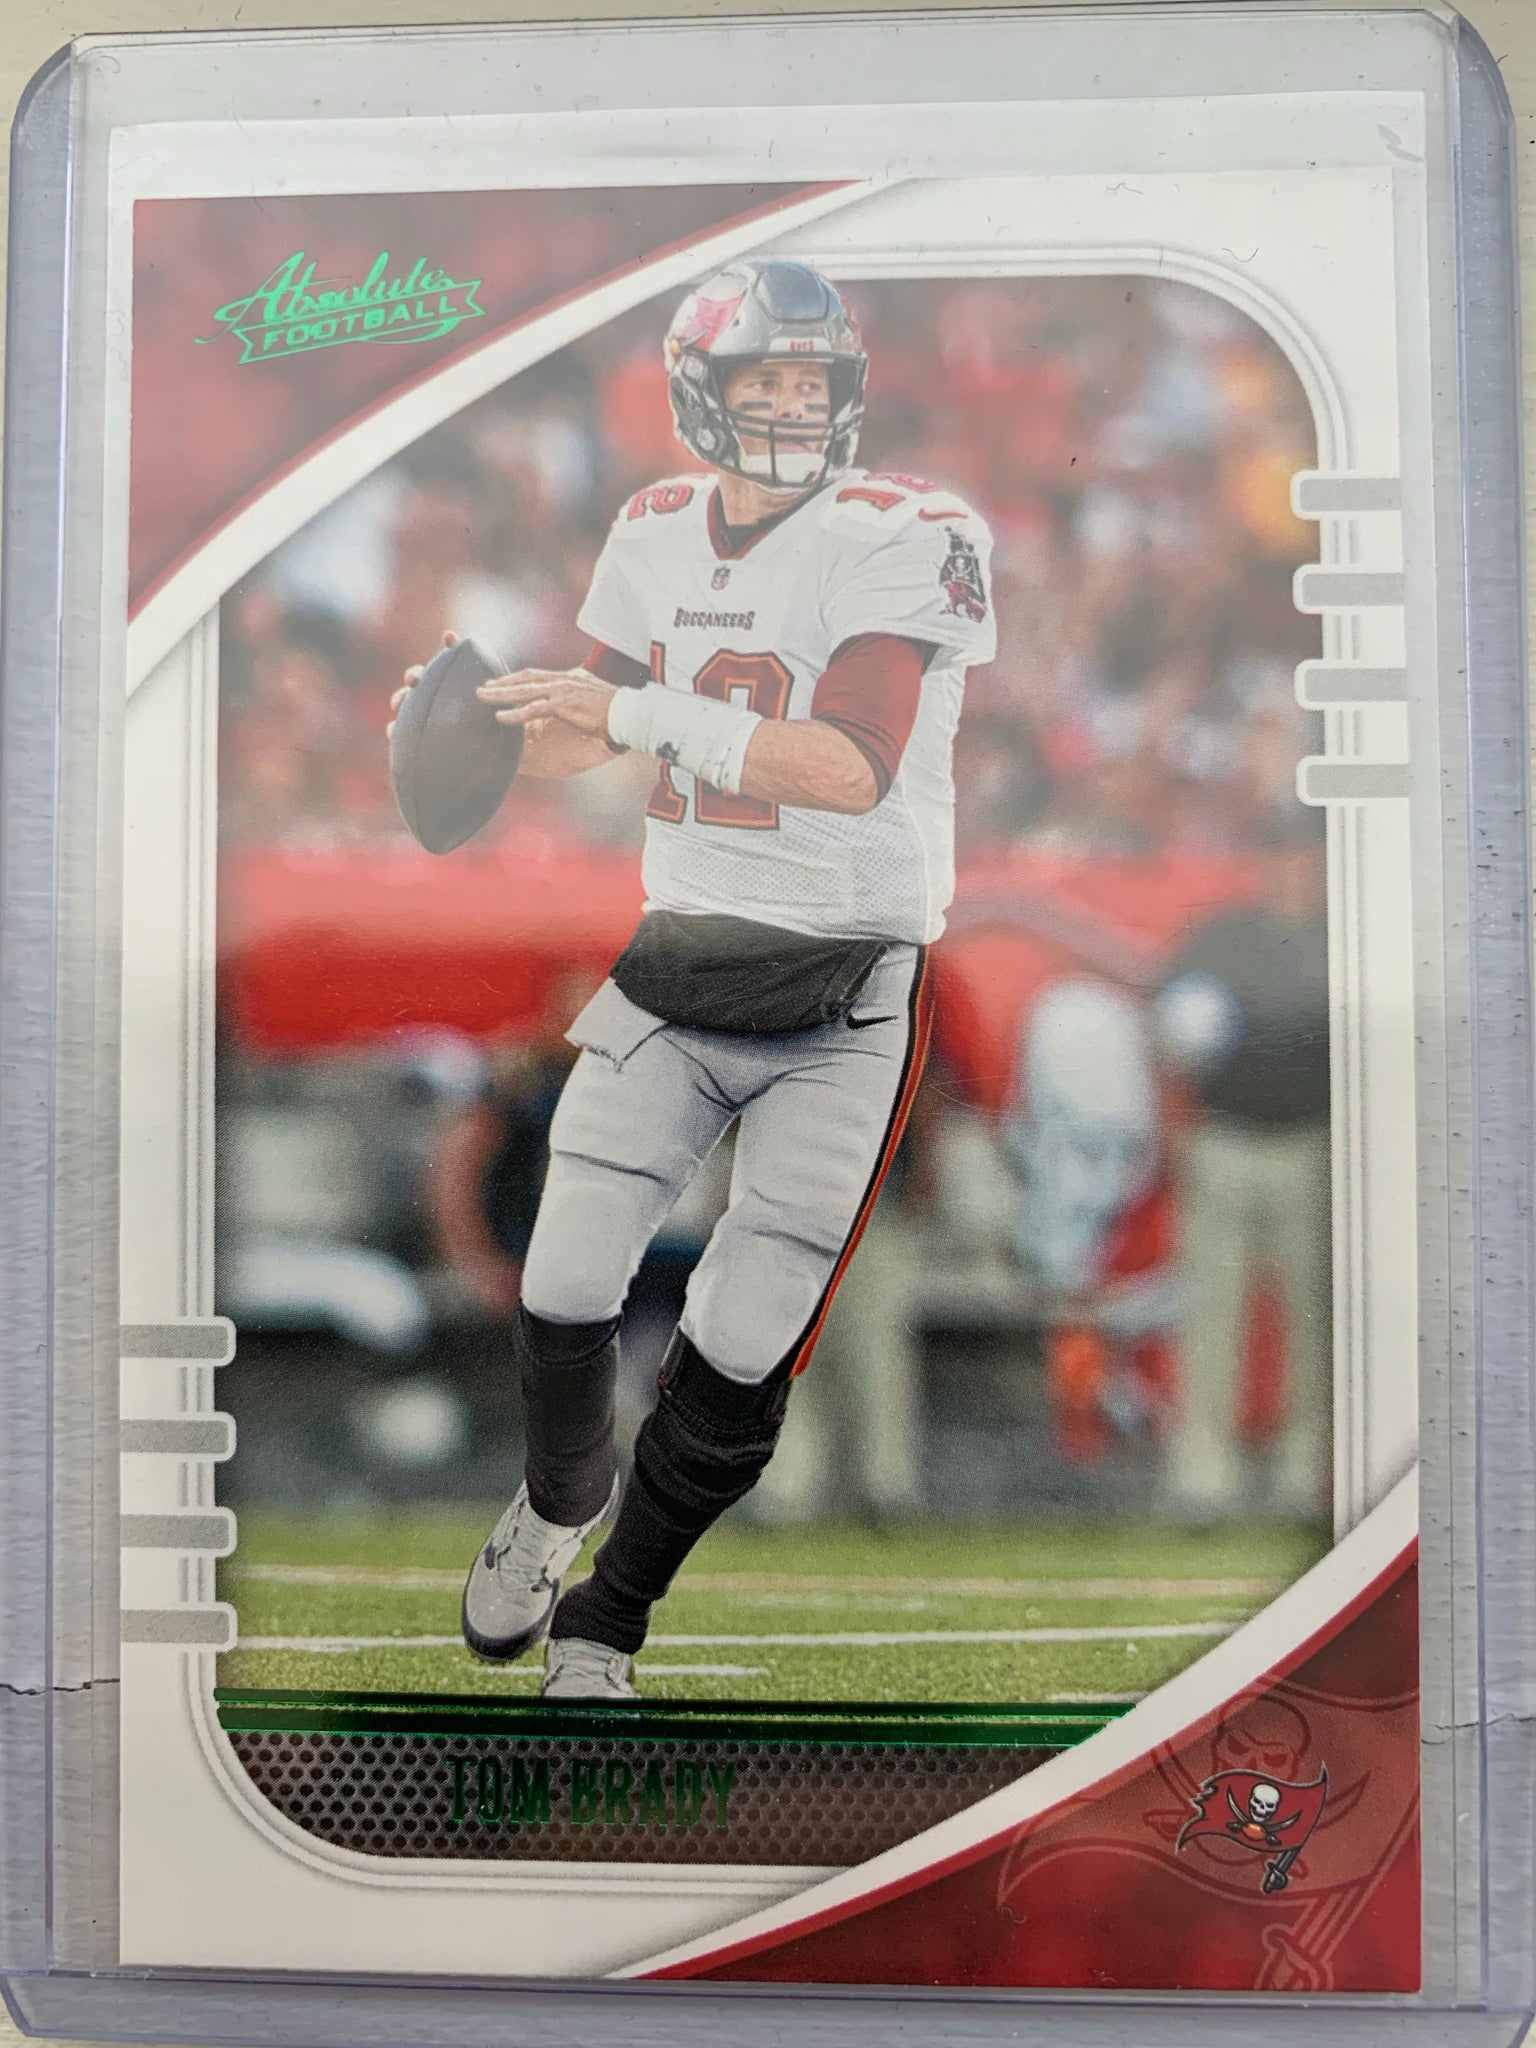 2020 PANINI ABSOLUTE FOOTBALL #42 TAMPA BAY BUCCANEERS - TOM BRADY ABSOLUTE GREEN FOIL CARD